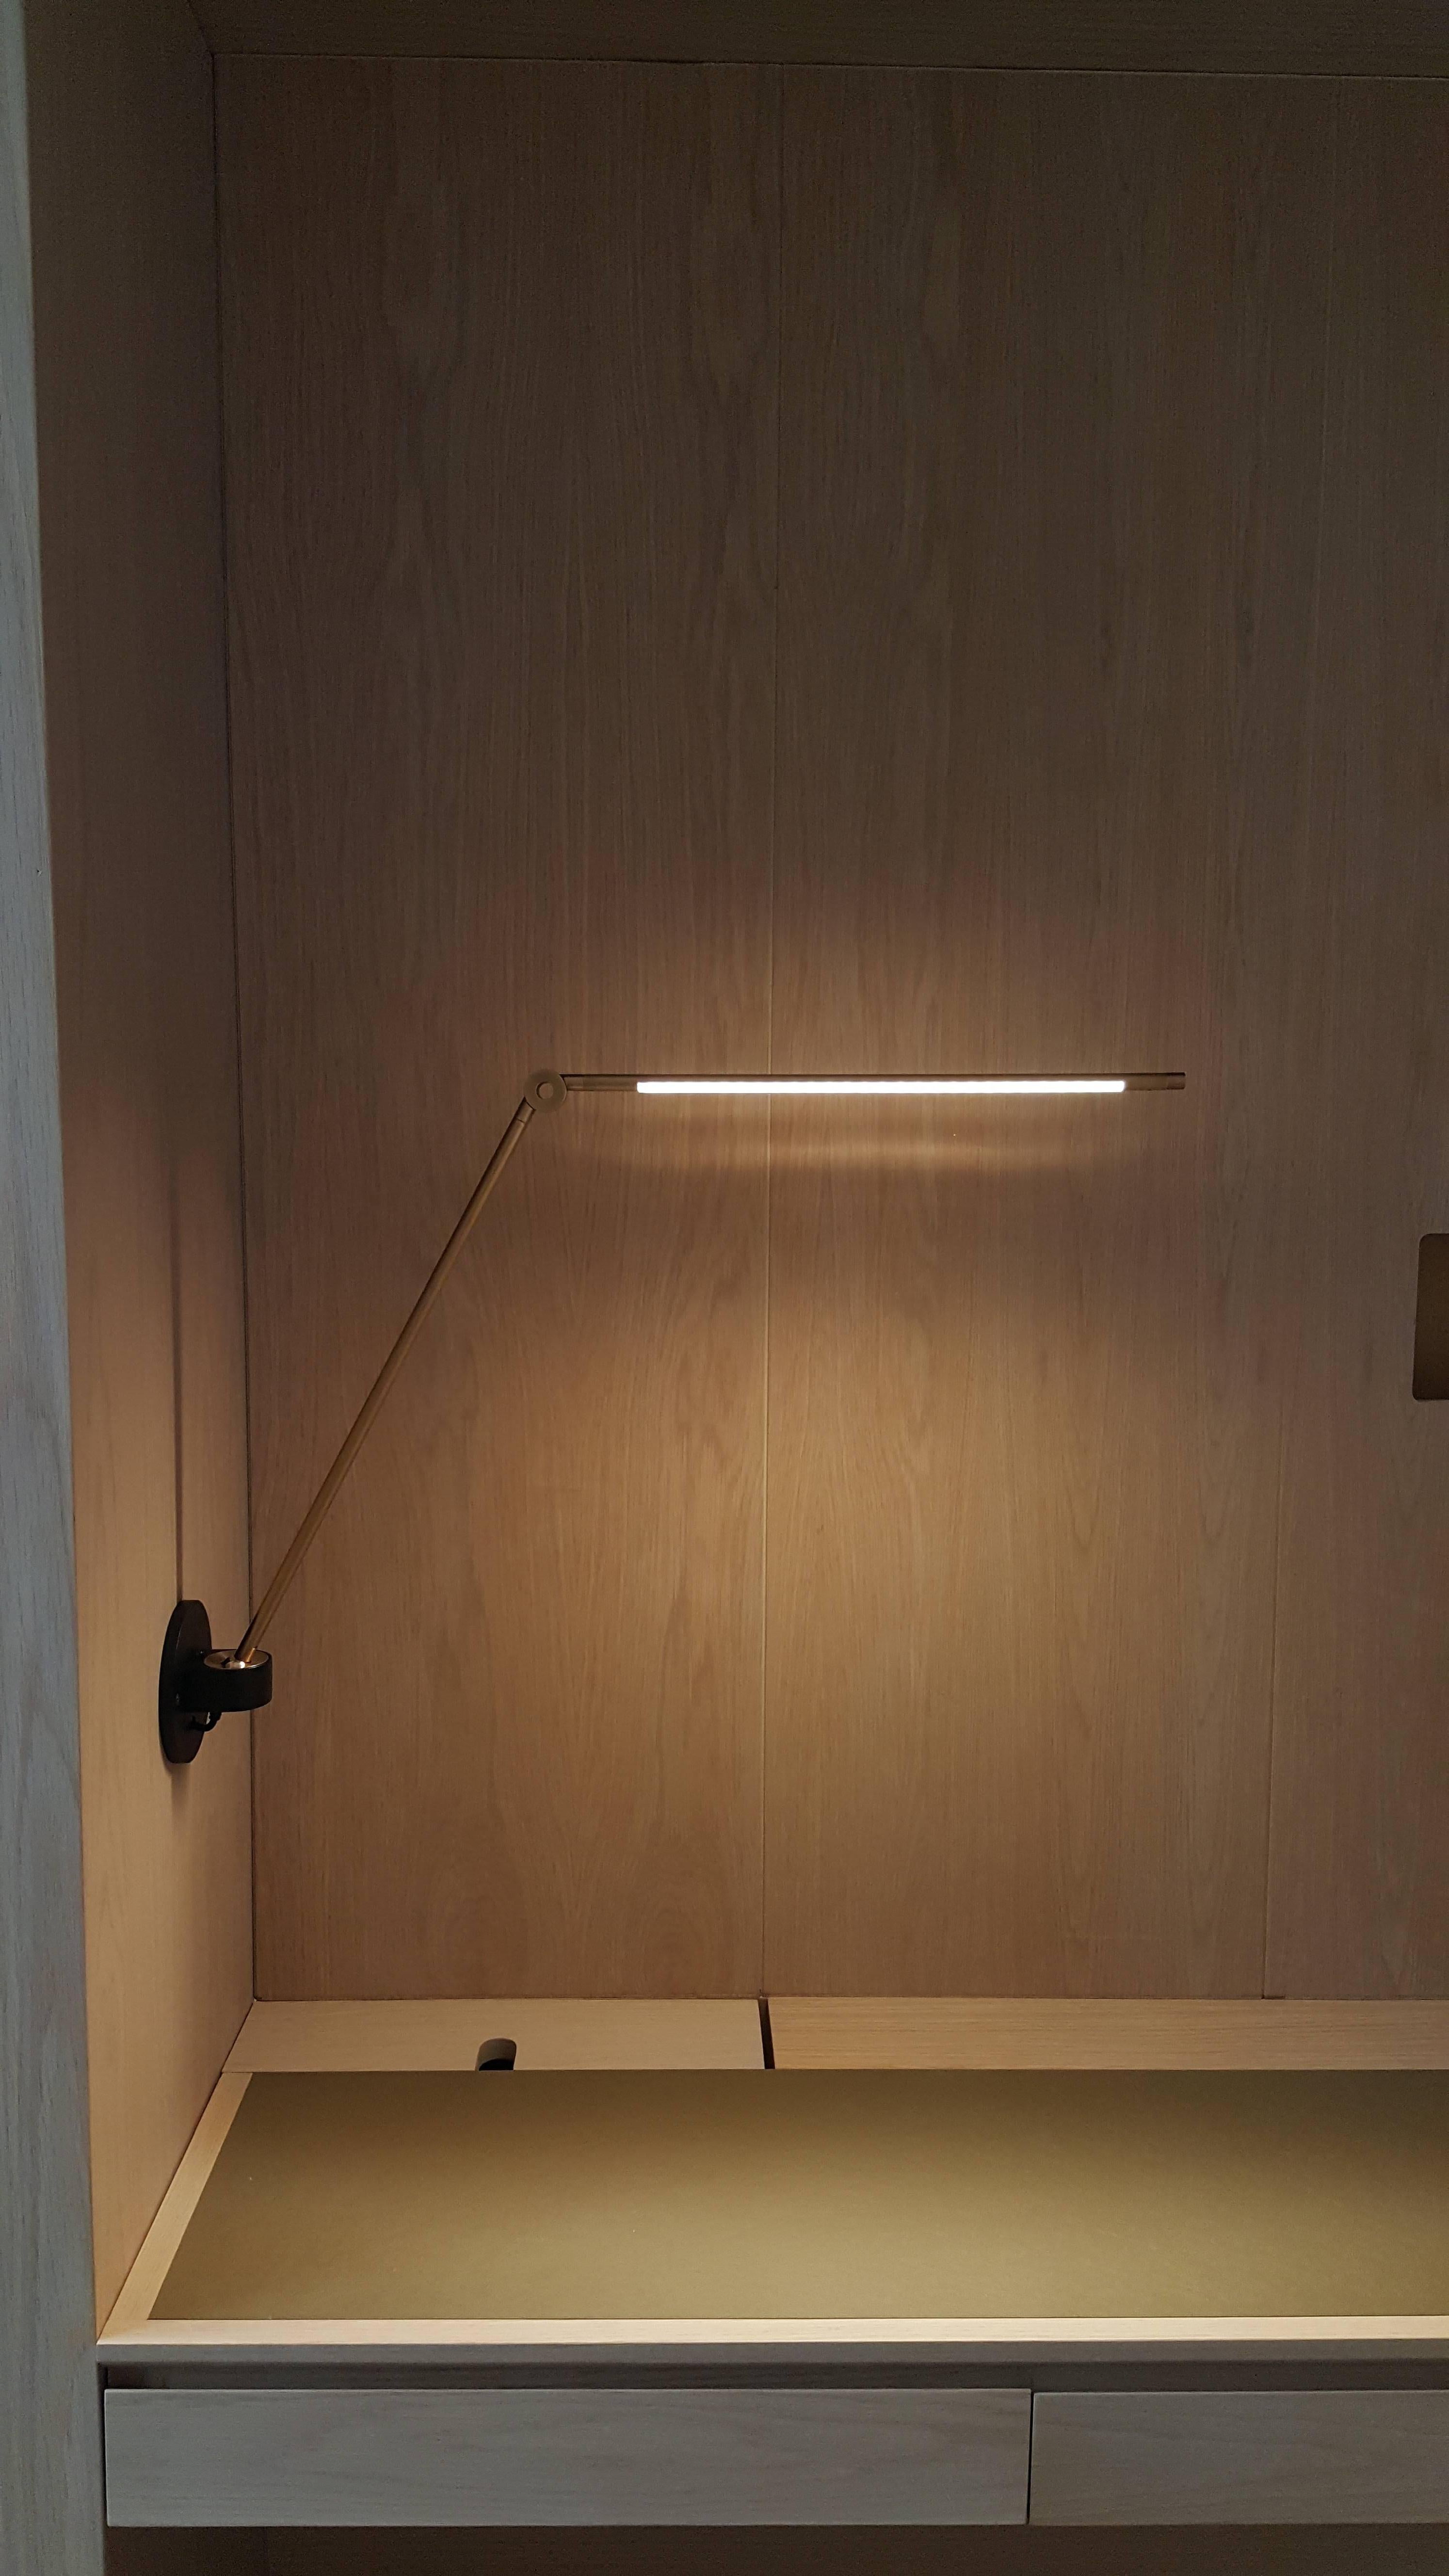 The lamp’s slender arms stretch across a work surface without taking it over and the mounted ball joint and spring-less hinge enable 360 degree movement, while also allowing the lamp to reduce into a minimal vertical profile. Elegant dimmer knob at